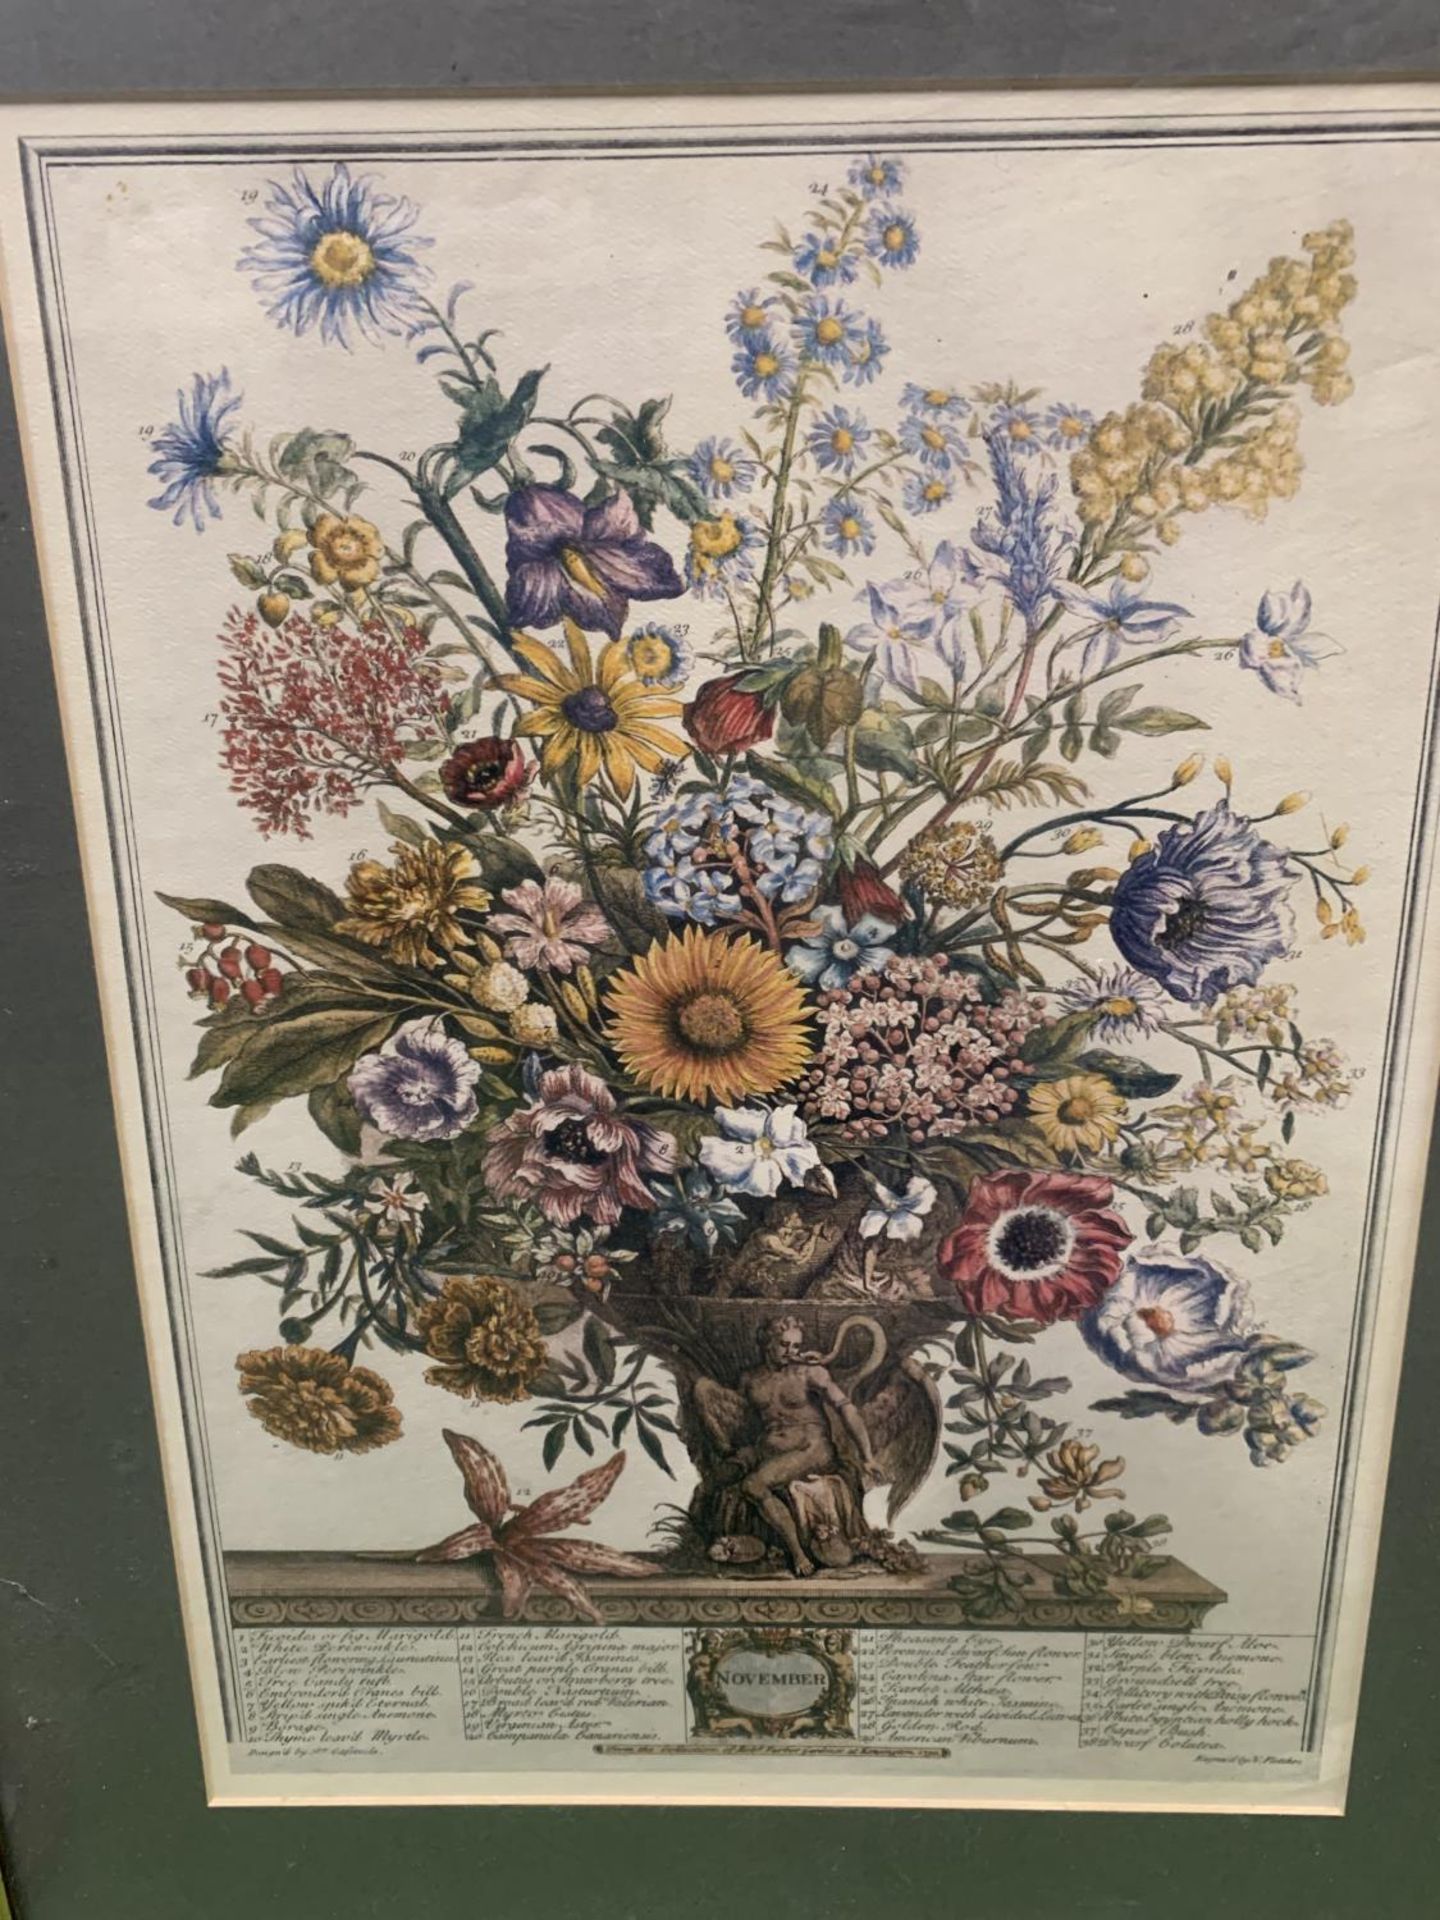 A FRAMED PRINT DEPICTING FLOWERS - Image 2 of 2